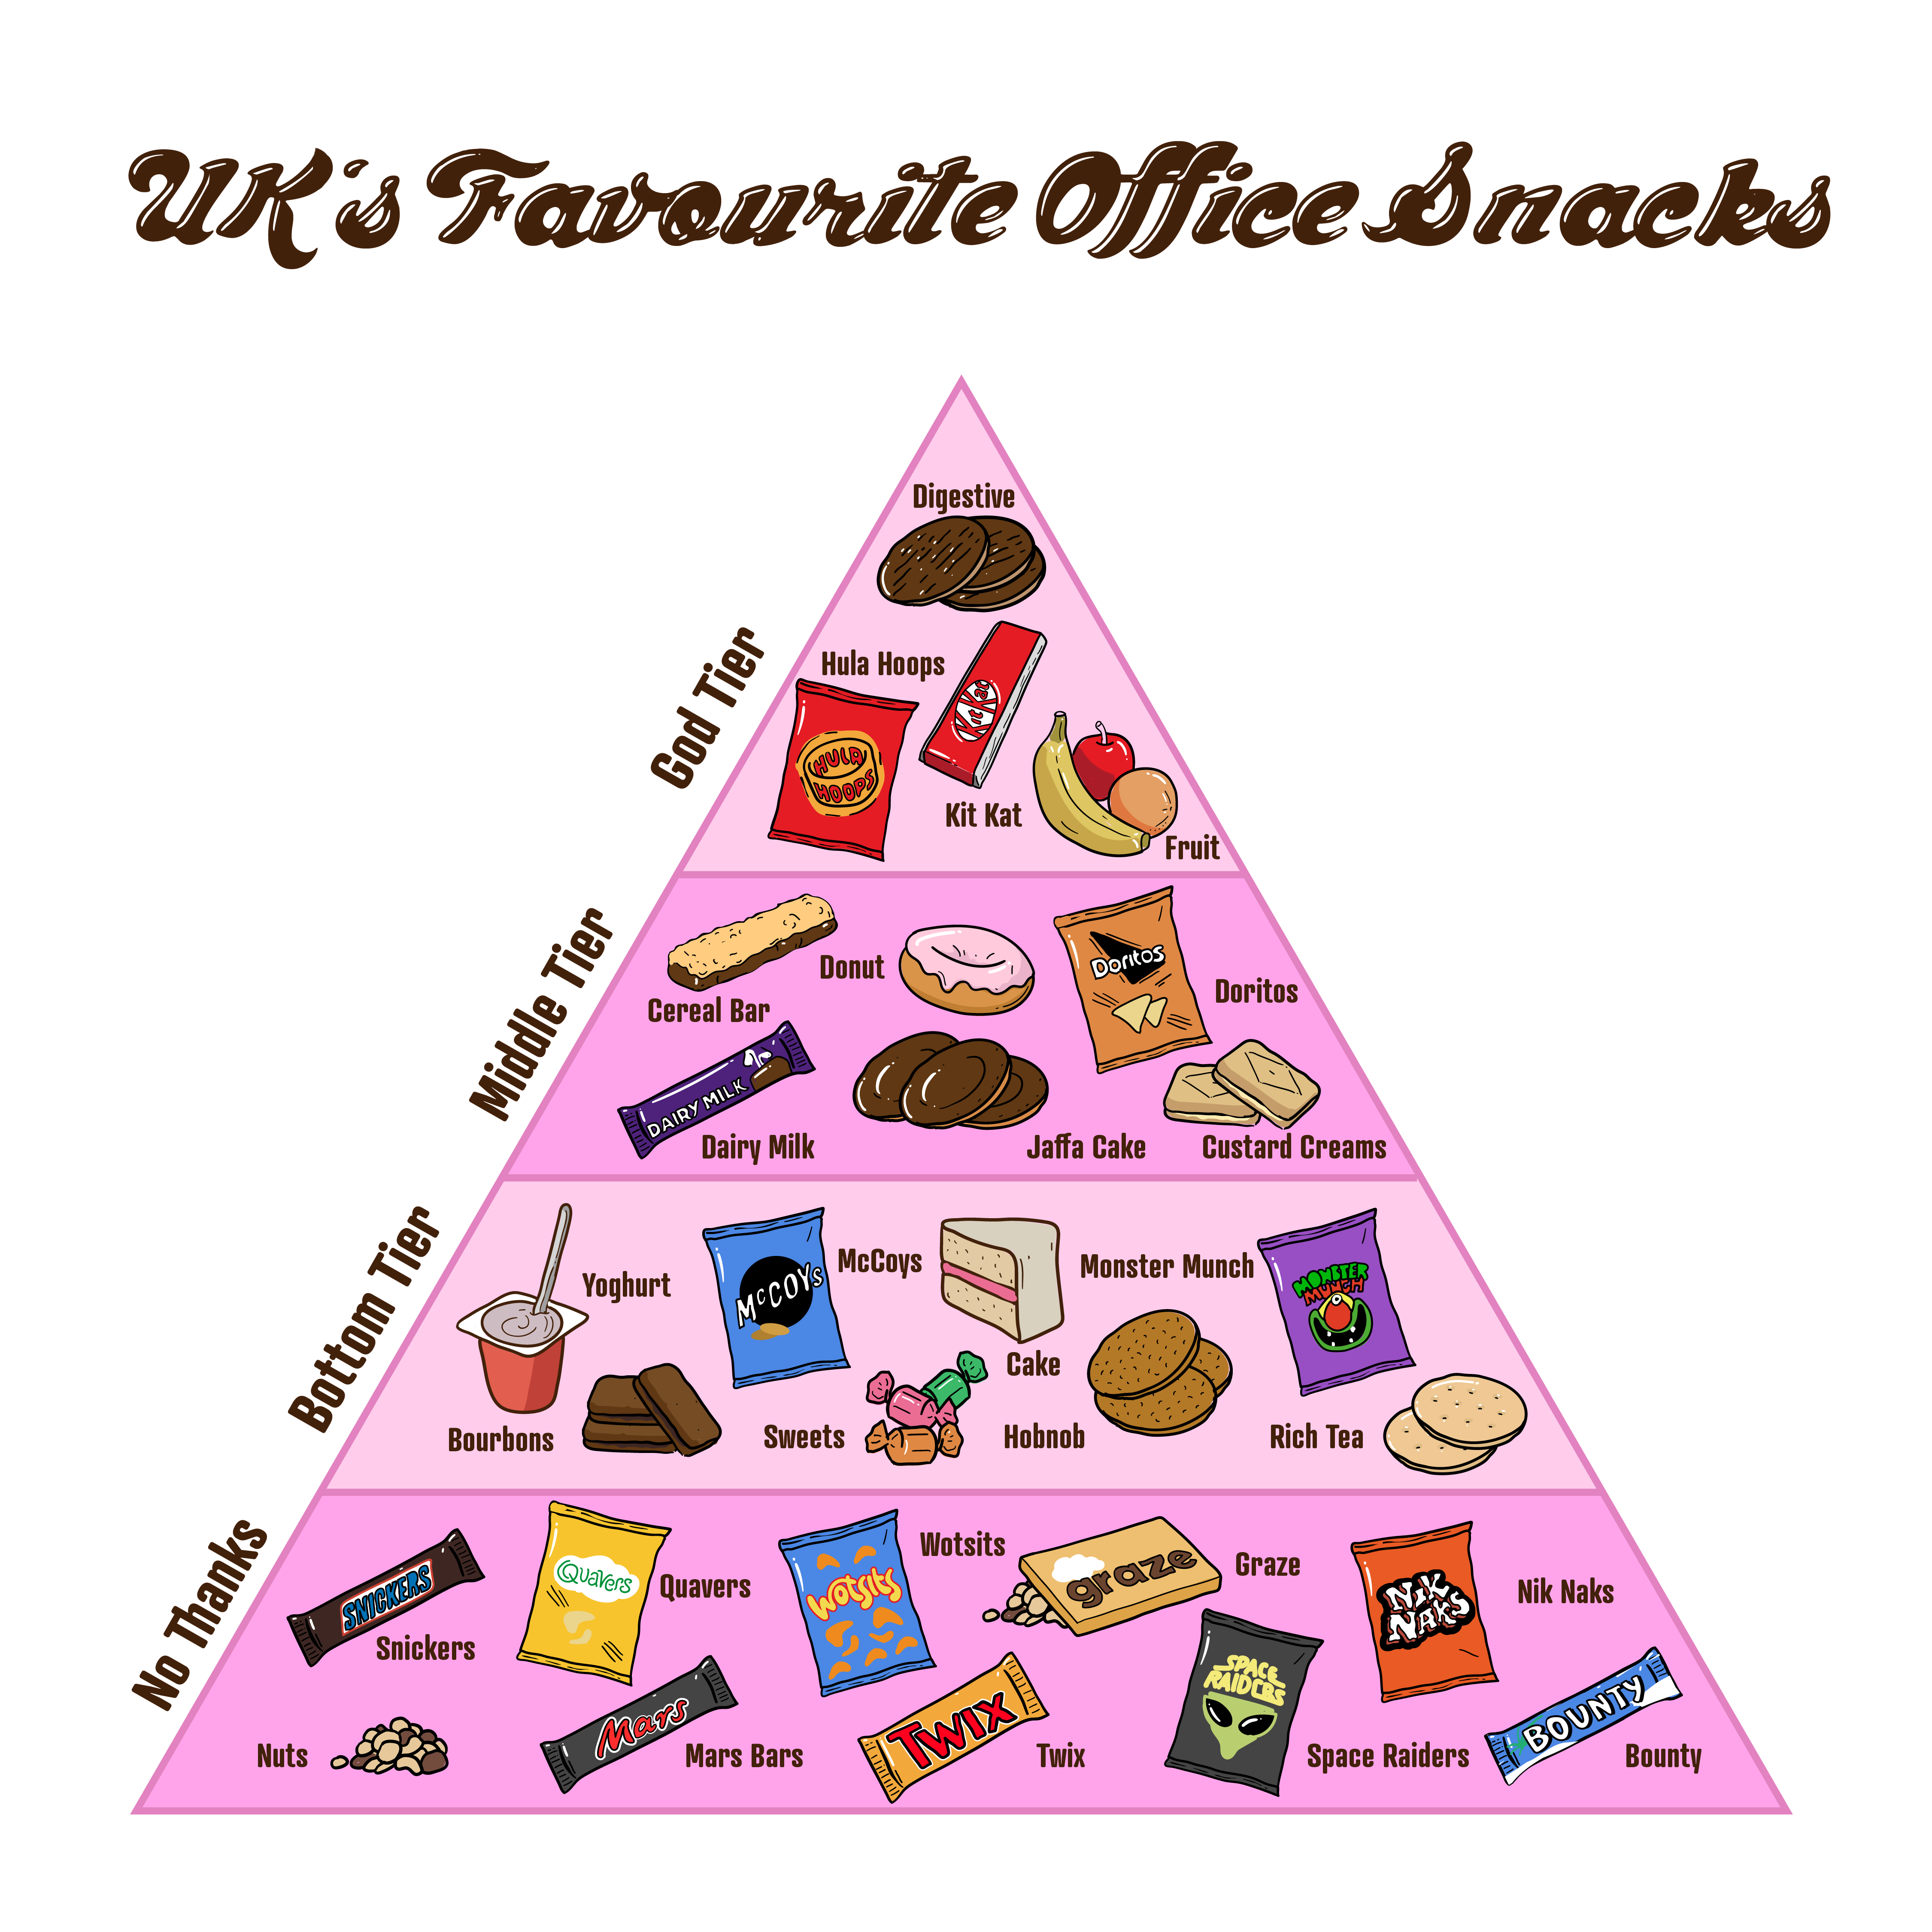 What Is the UK’s Favourite Office Snack?